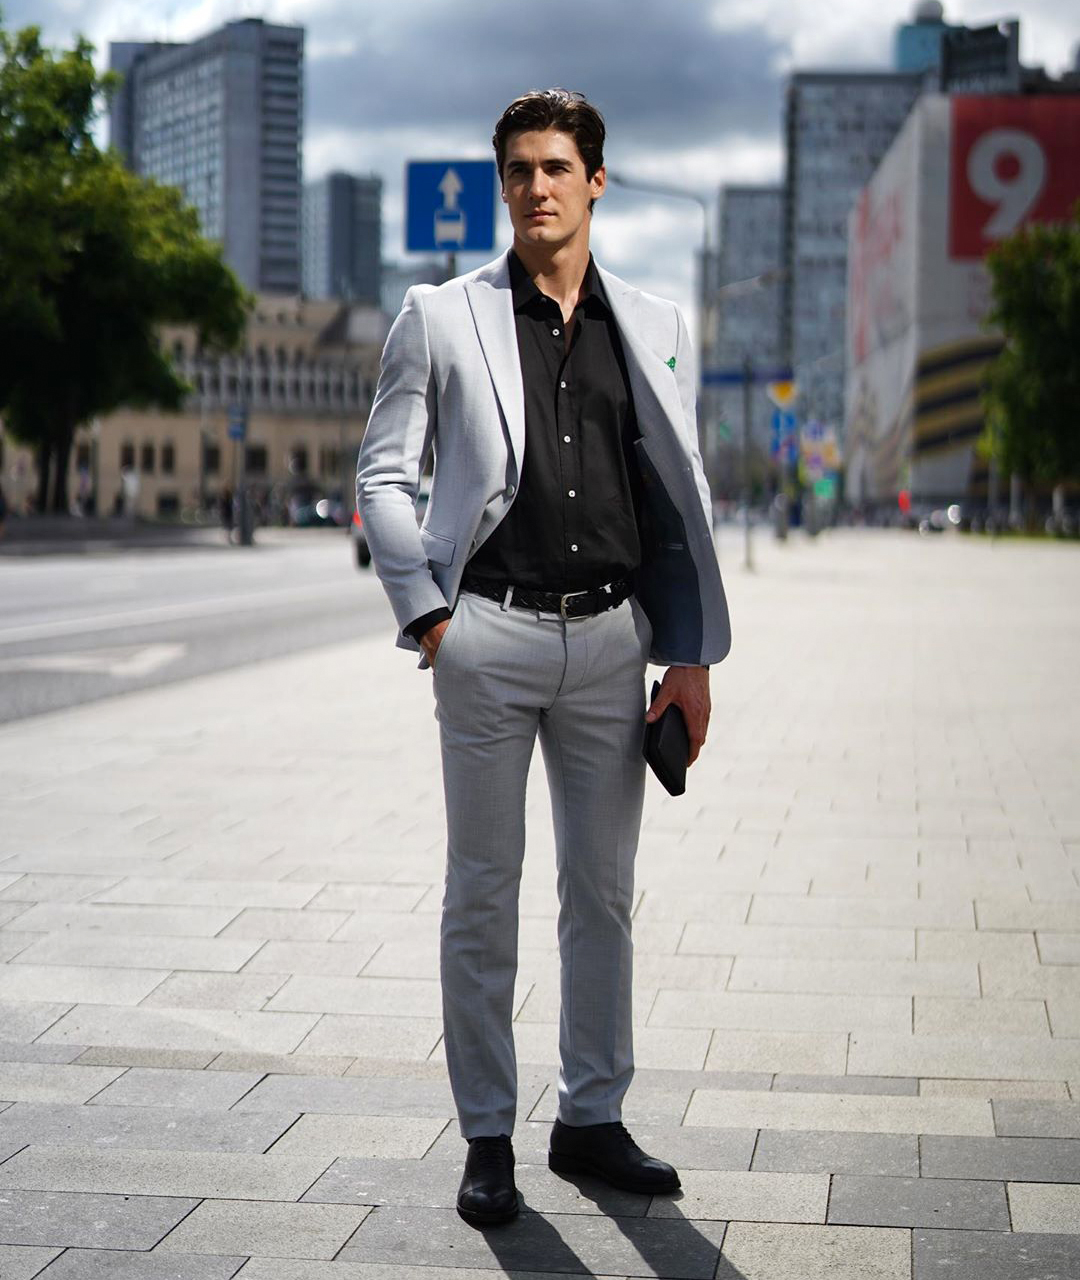 light grey suit and black shirt with black Oxford shoes